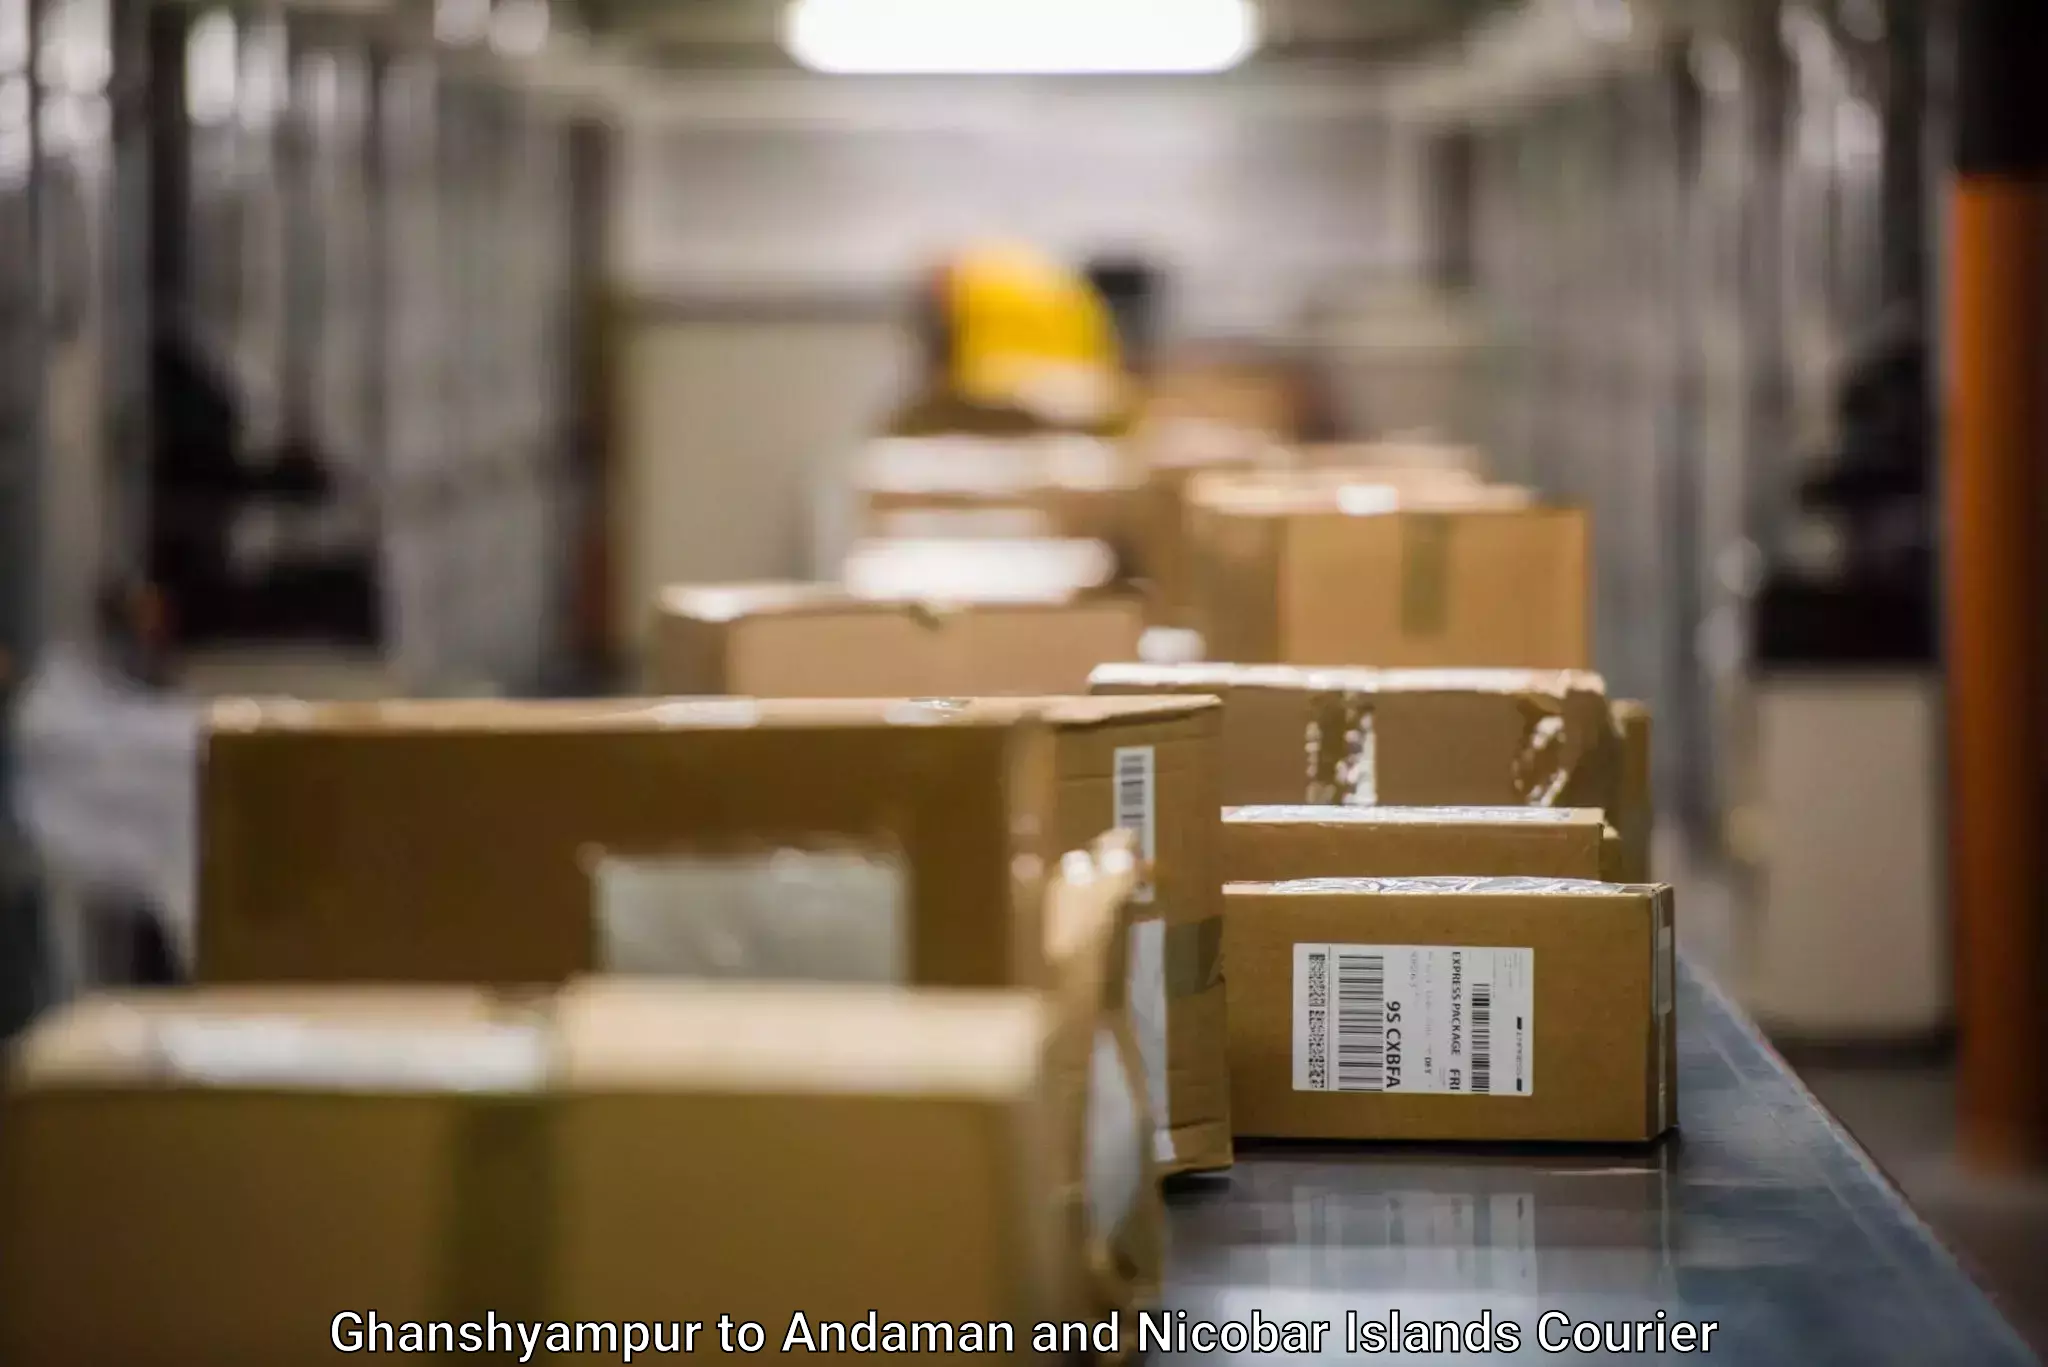 Efficient order fulfillment Ghanshyampur to South Andaman